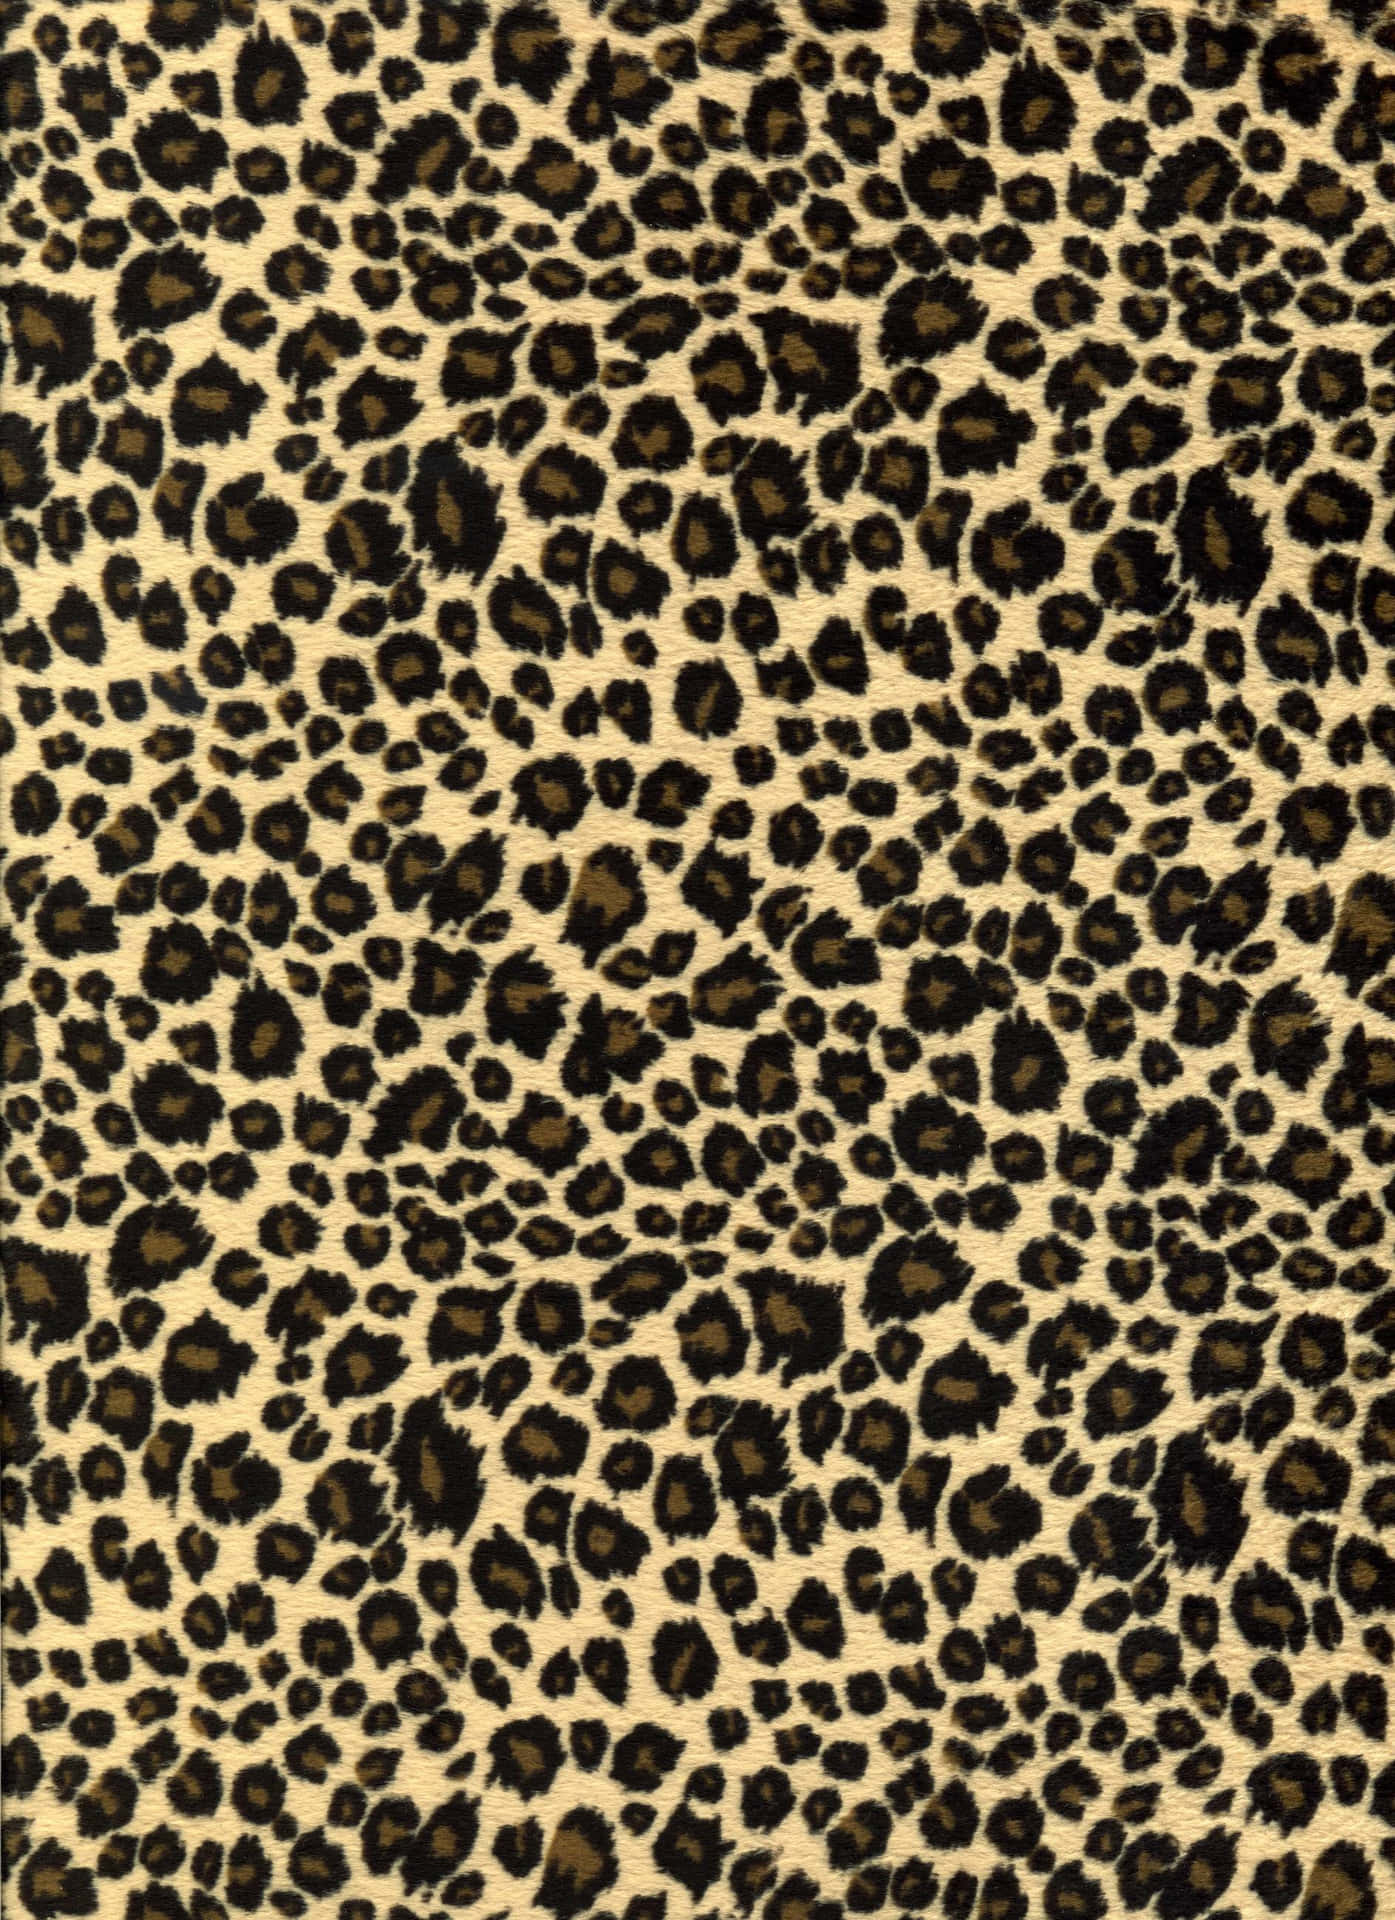 Caption: Express Your Wild Side With A Vibrant Leopard Print Background!